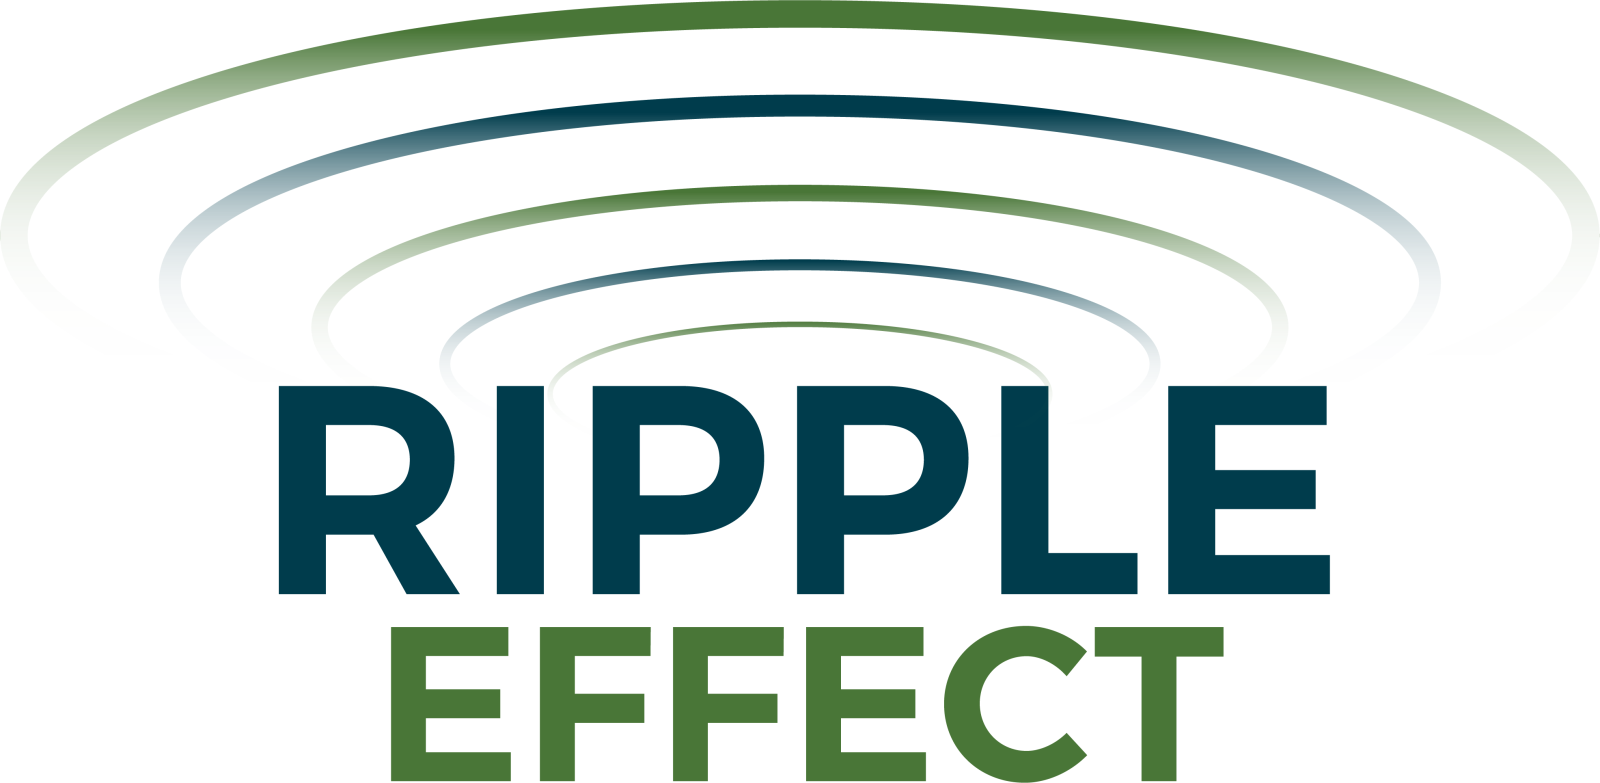 Ripple Effect provides assistance through Iowa independent telecommunication companies